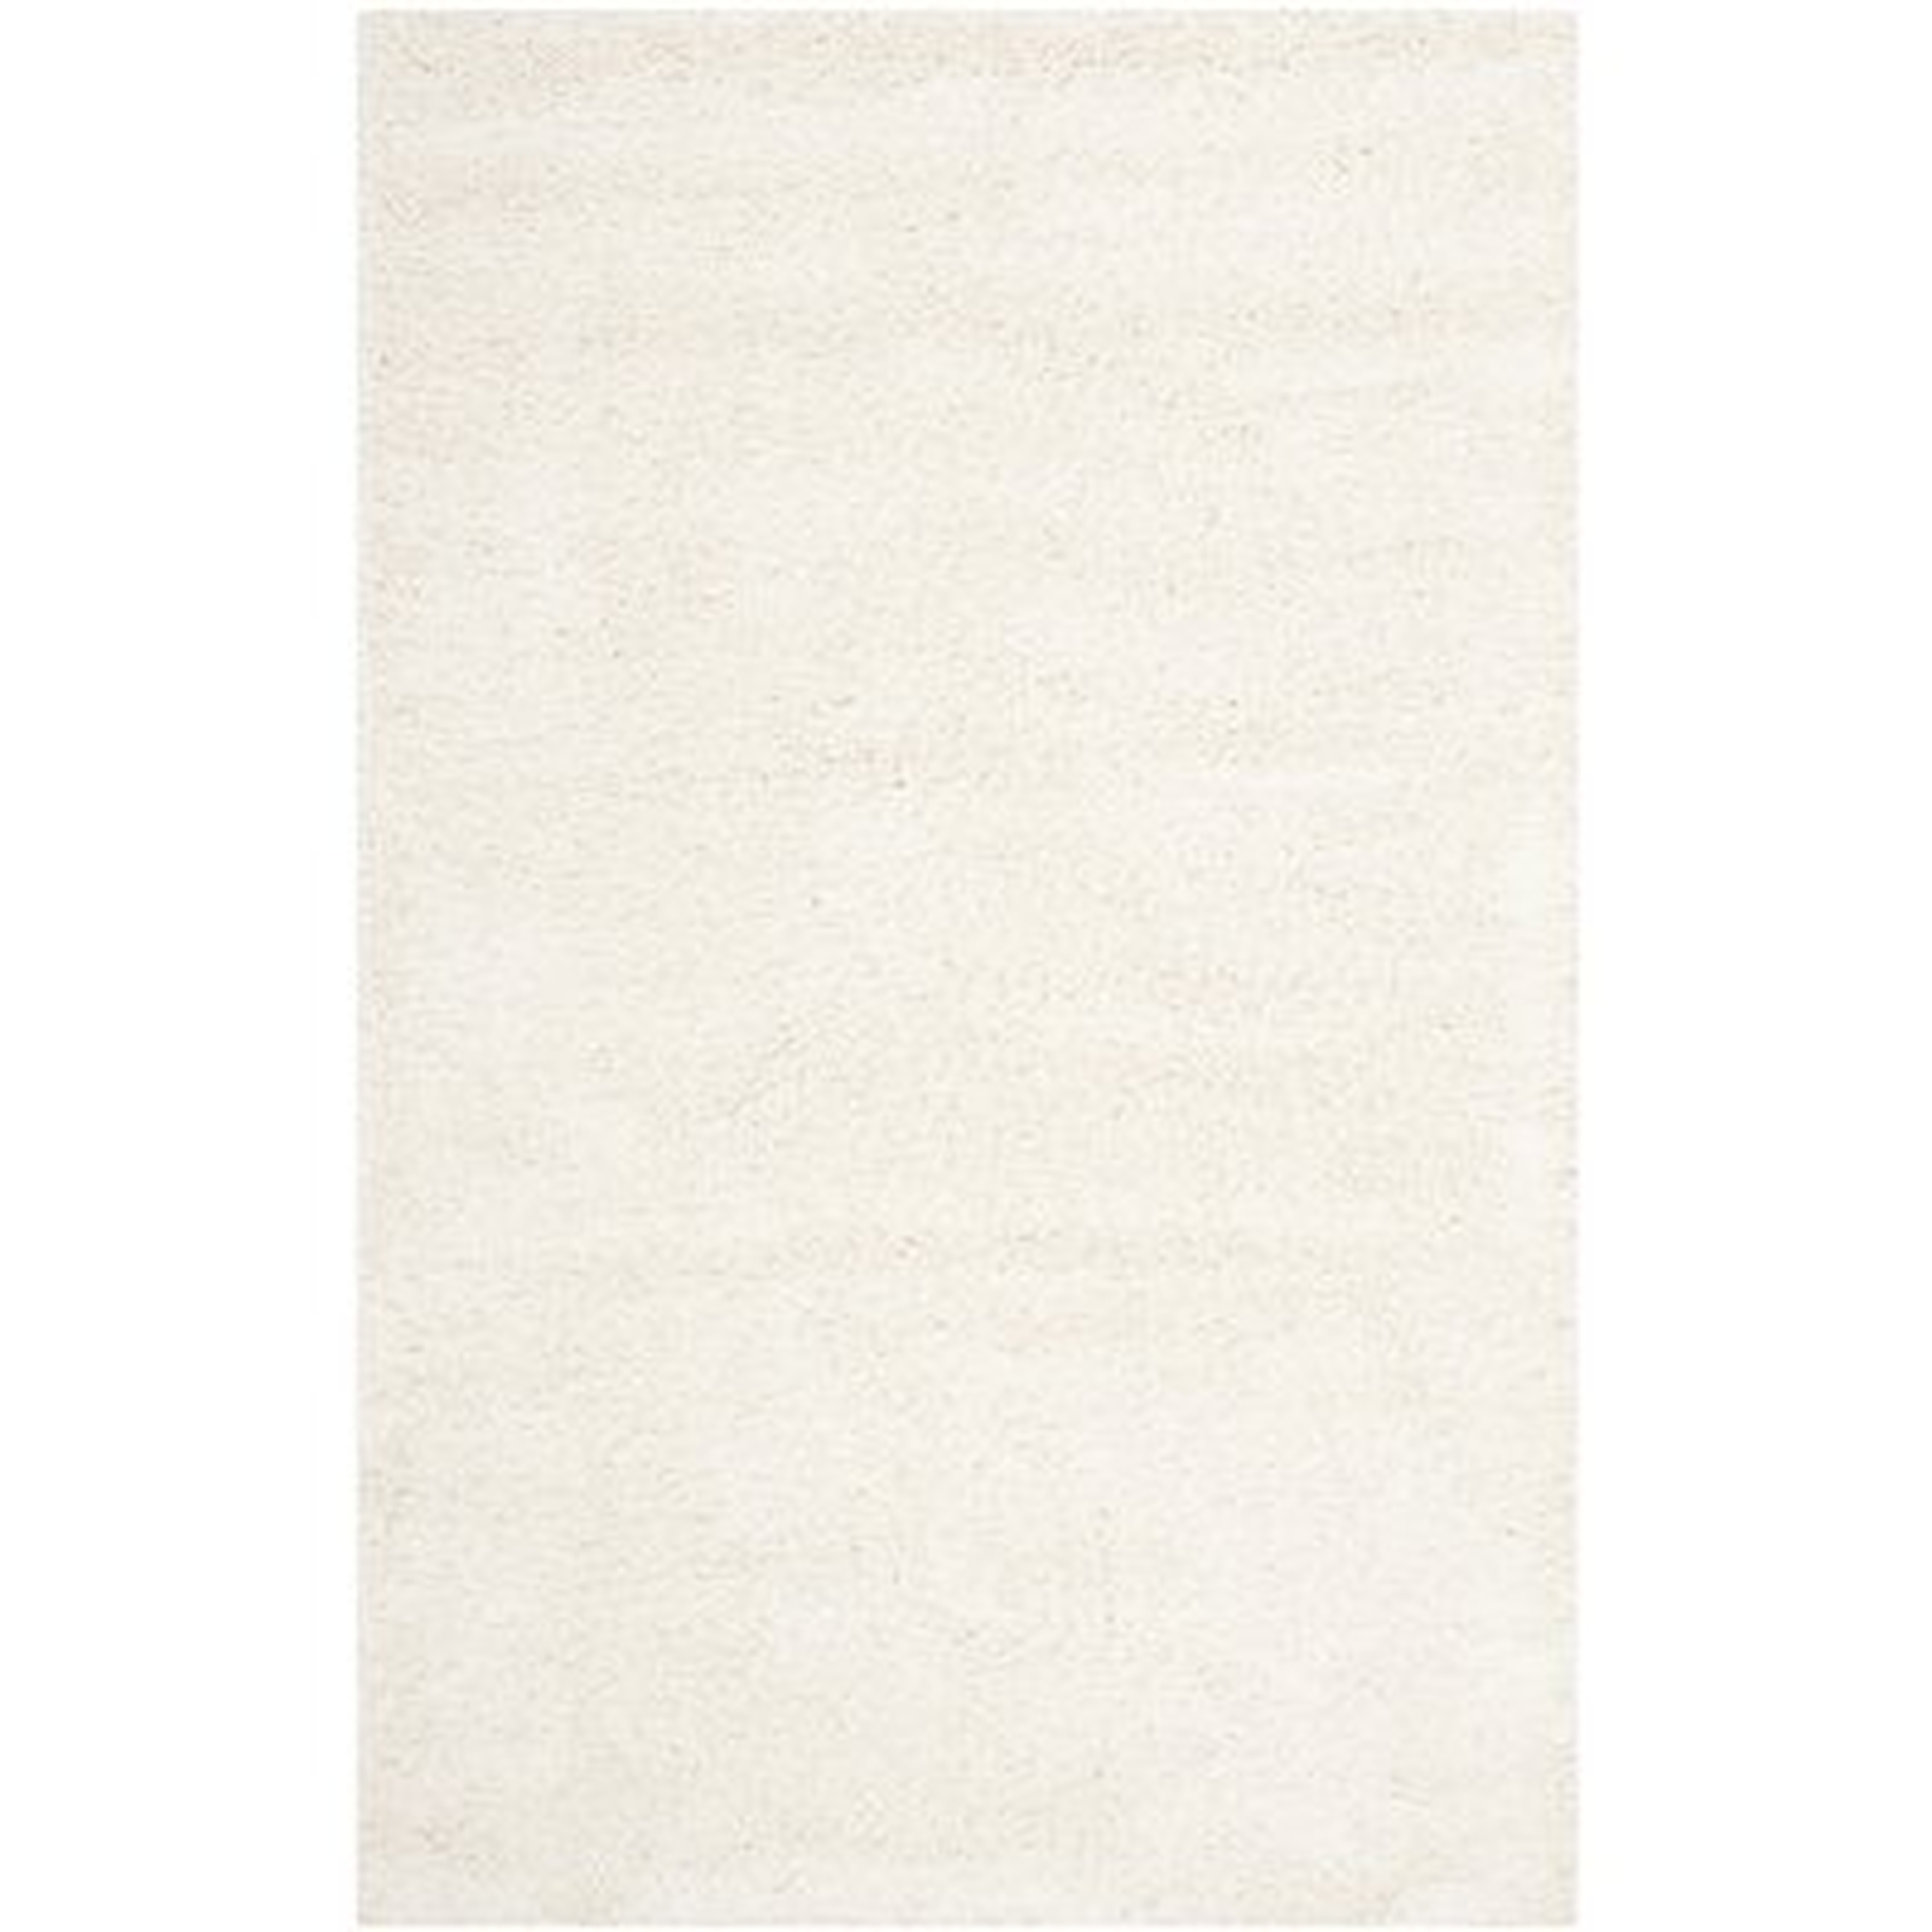 Starr Hill Solid Ivory Area Rug 5'3" x 8' - Wayfair